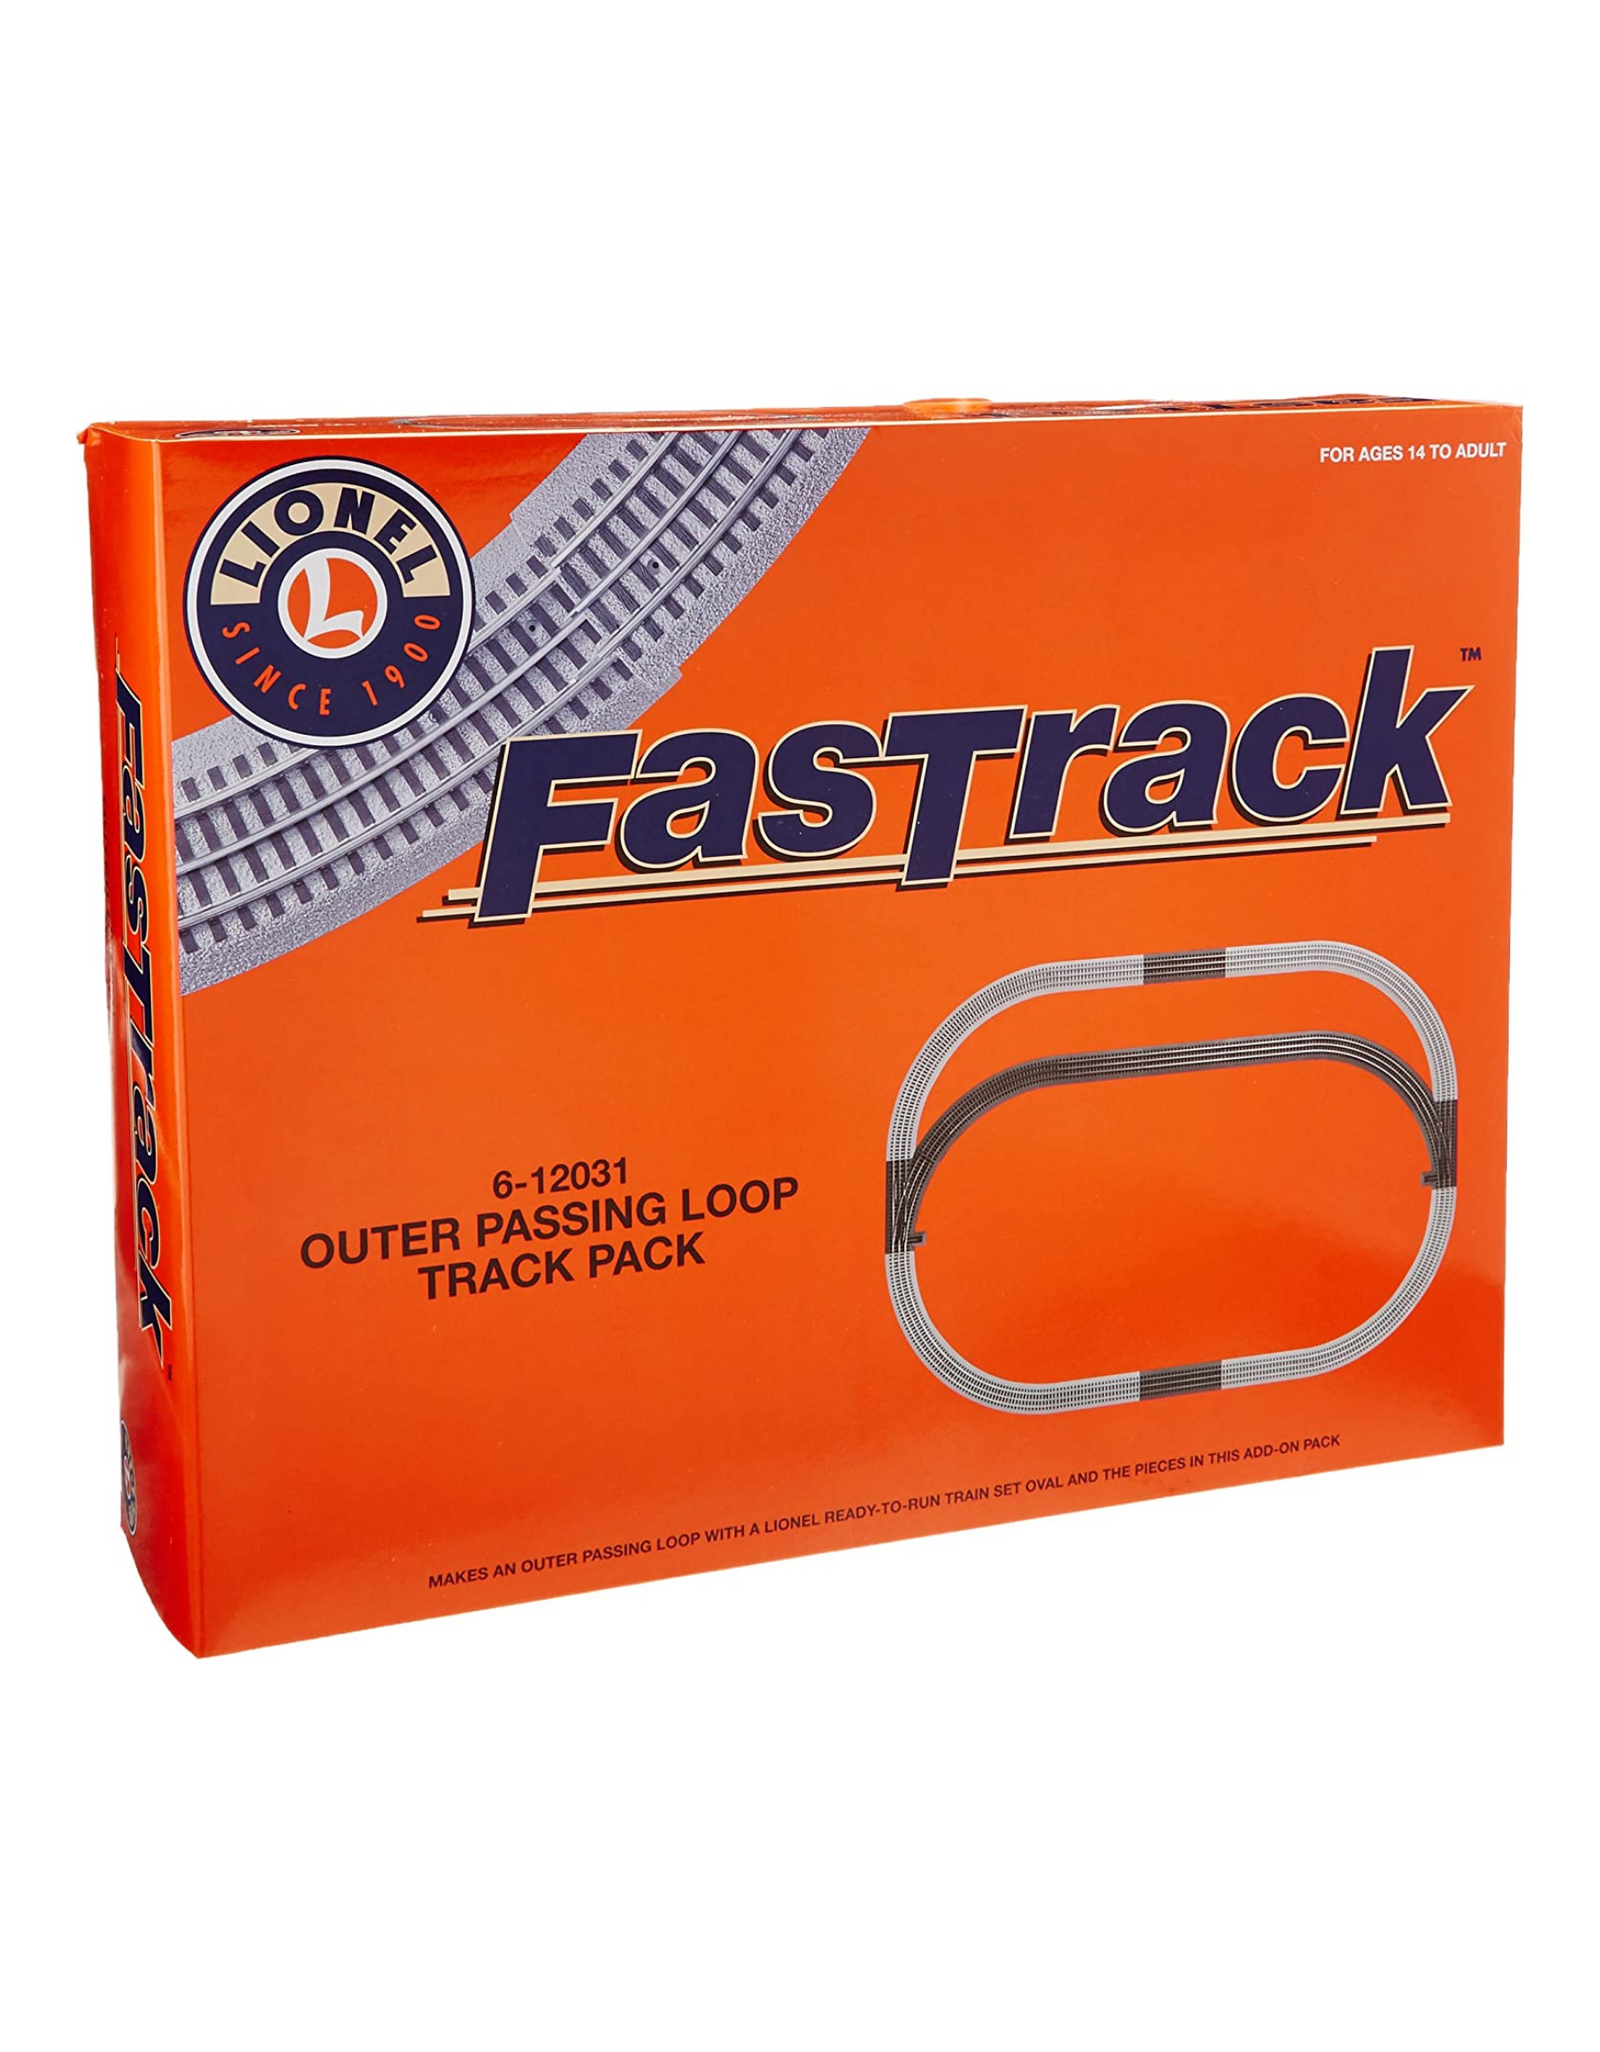 Lionel FasTrack Electric O Gauge, Outer Passing Loop Add-on Pack - For Ages 14 To Adult